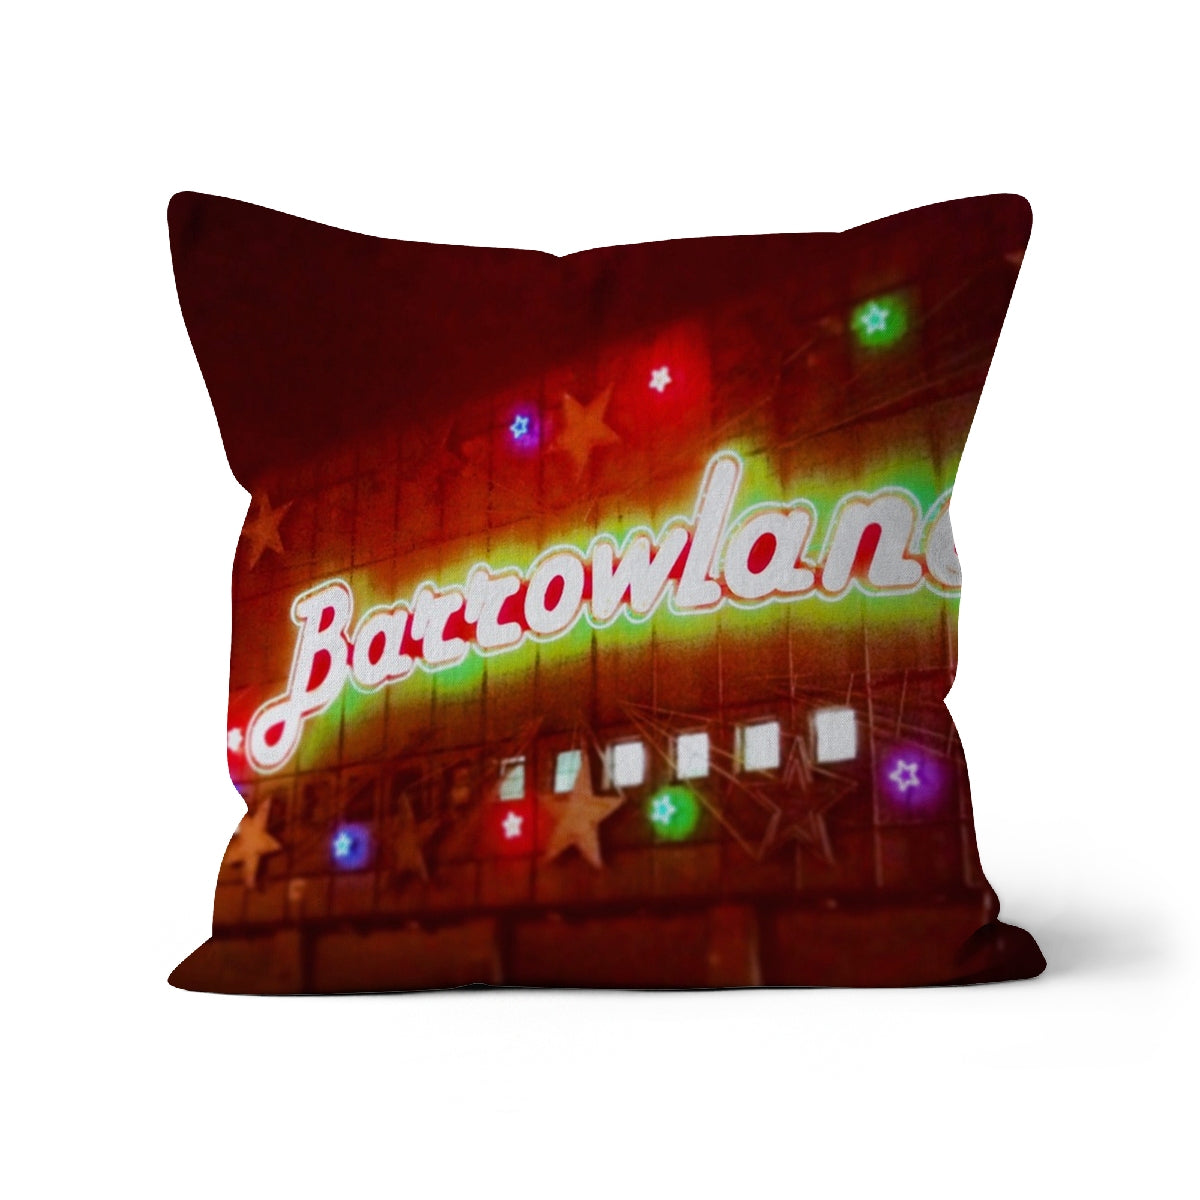 A Neon Glasgow Barrowlands Art Gifts Cushion-Cushions-Edinburgh & Glasgow Art Gallery-Faux Suede-16"x16"-Paintings, Prints, Homeware, Art Gifts From Scotland By Scottish Artist Kevin Hunter